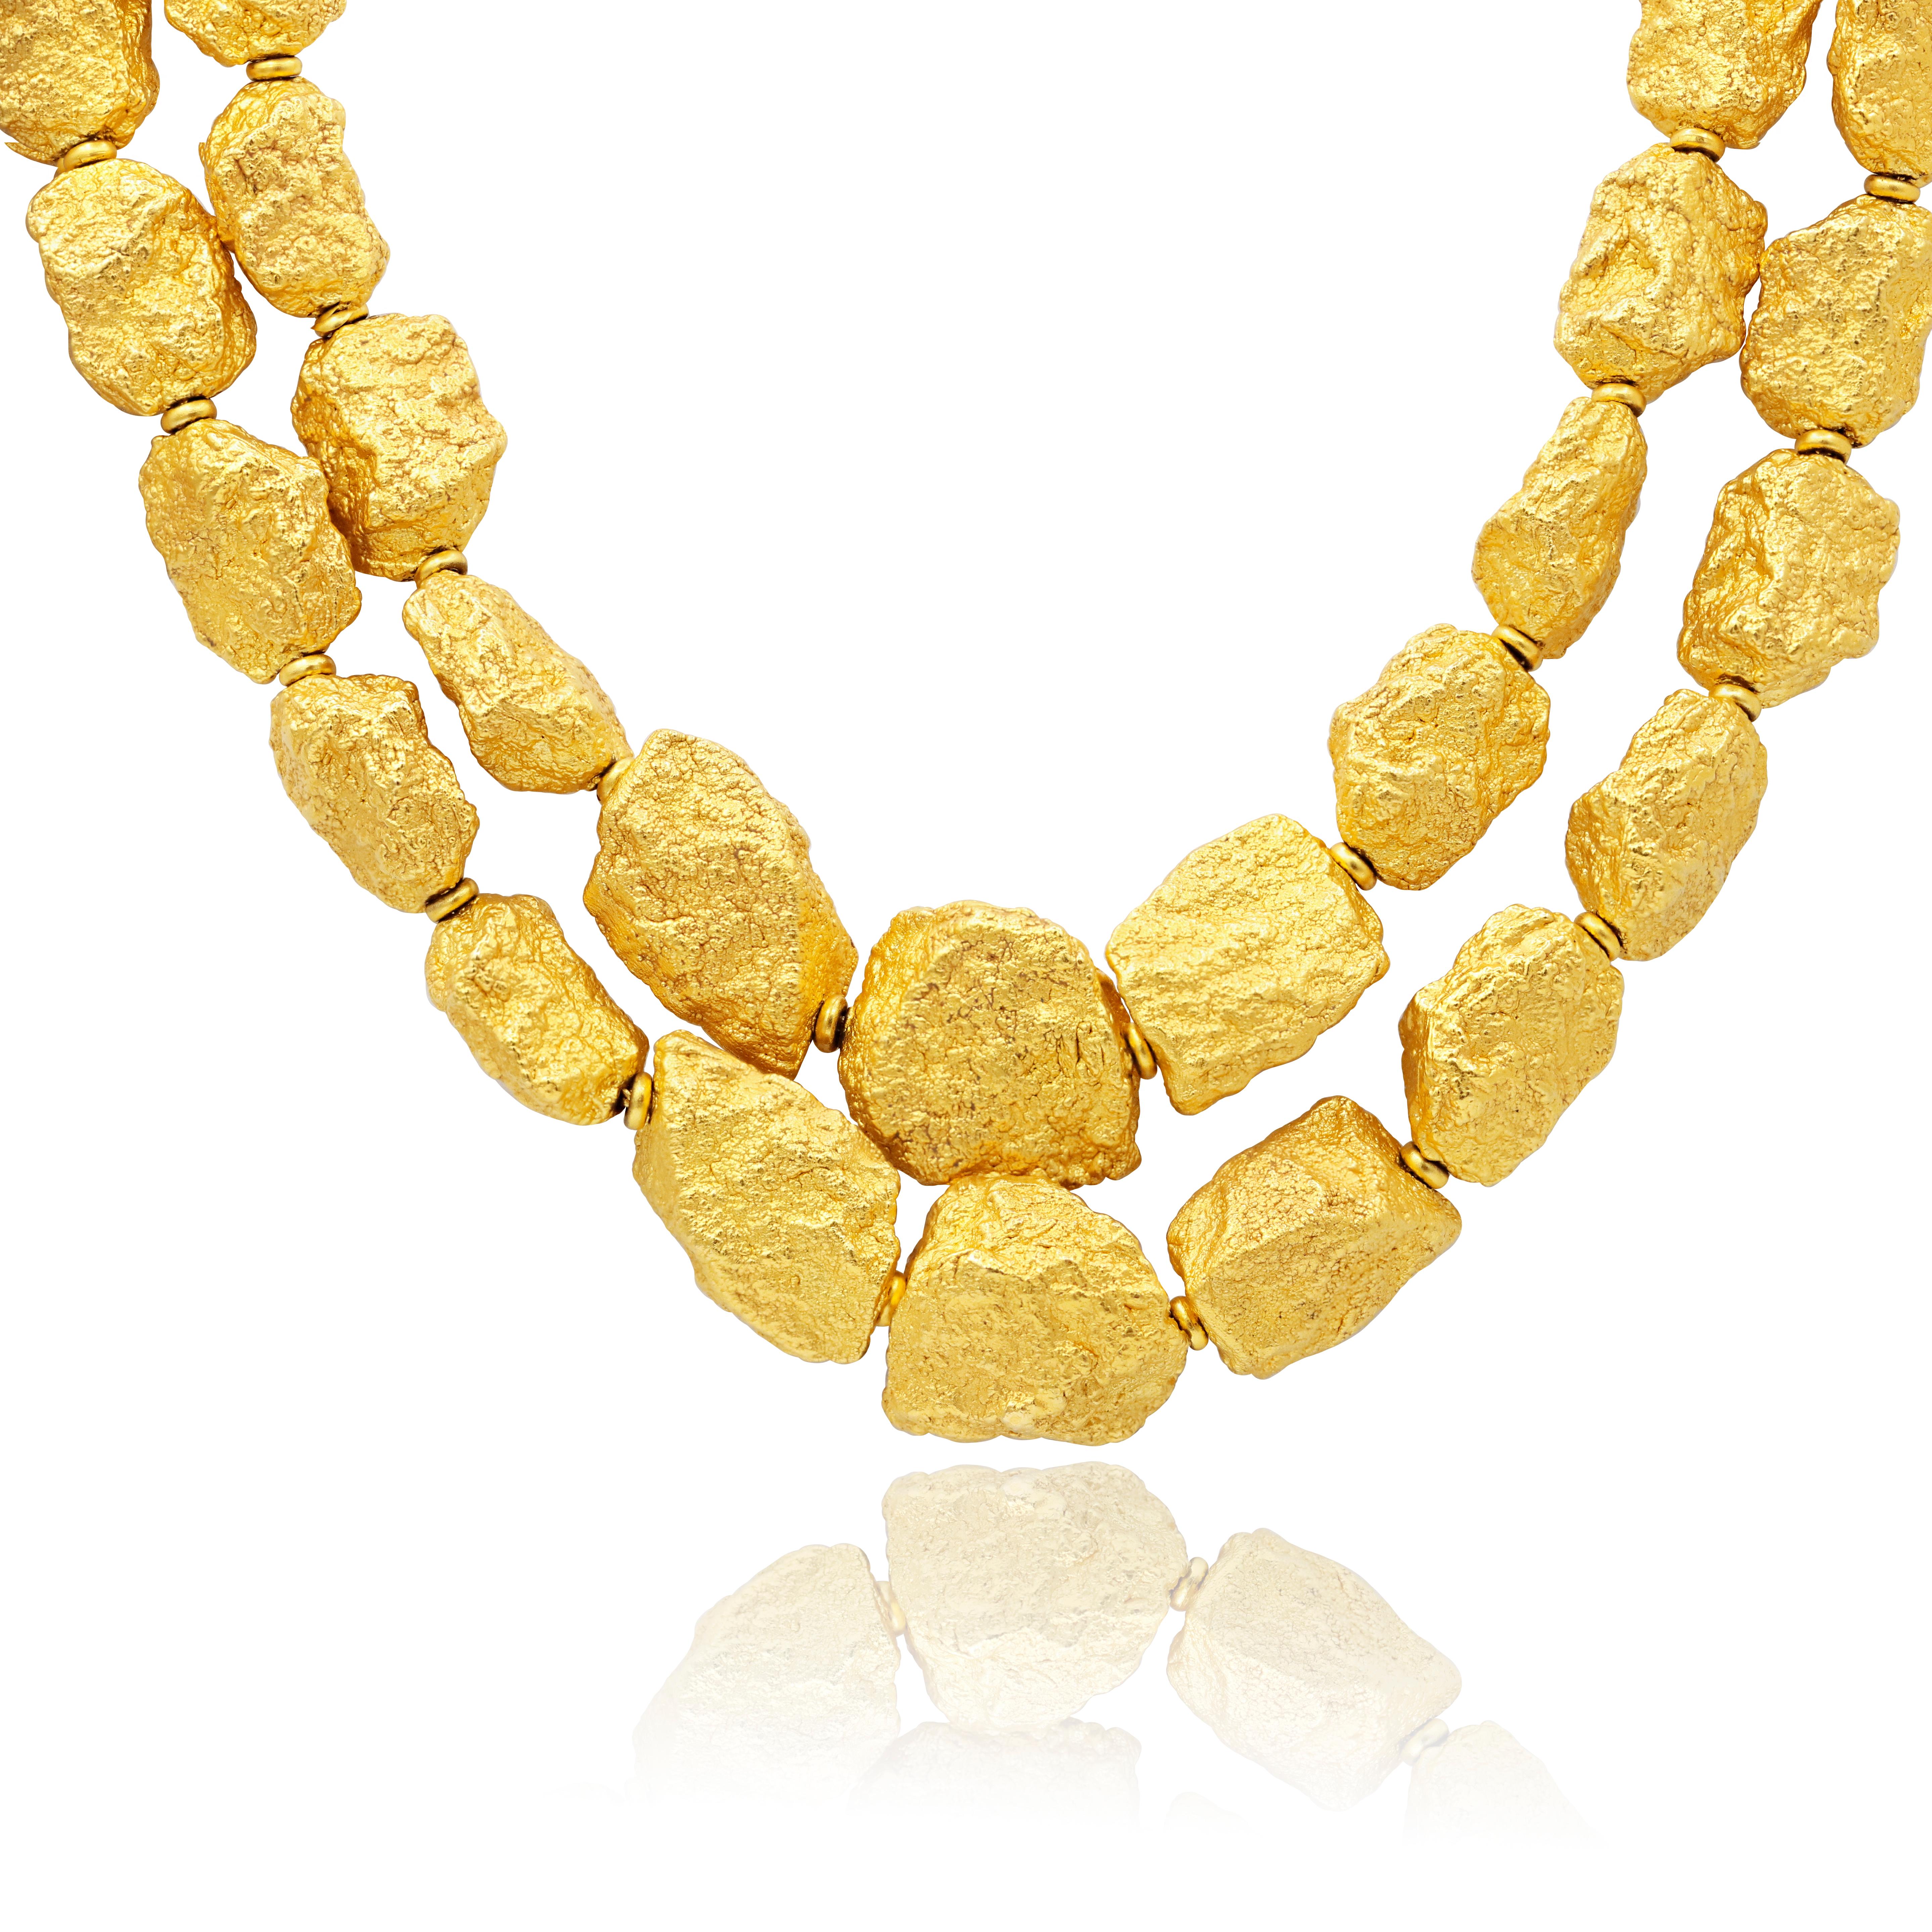 Roberto Coin fancy necklace comprised of 18ct yellow gold hollow links that are fashioned in the shapes of gold nuggets.

Length: 18